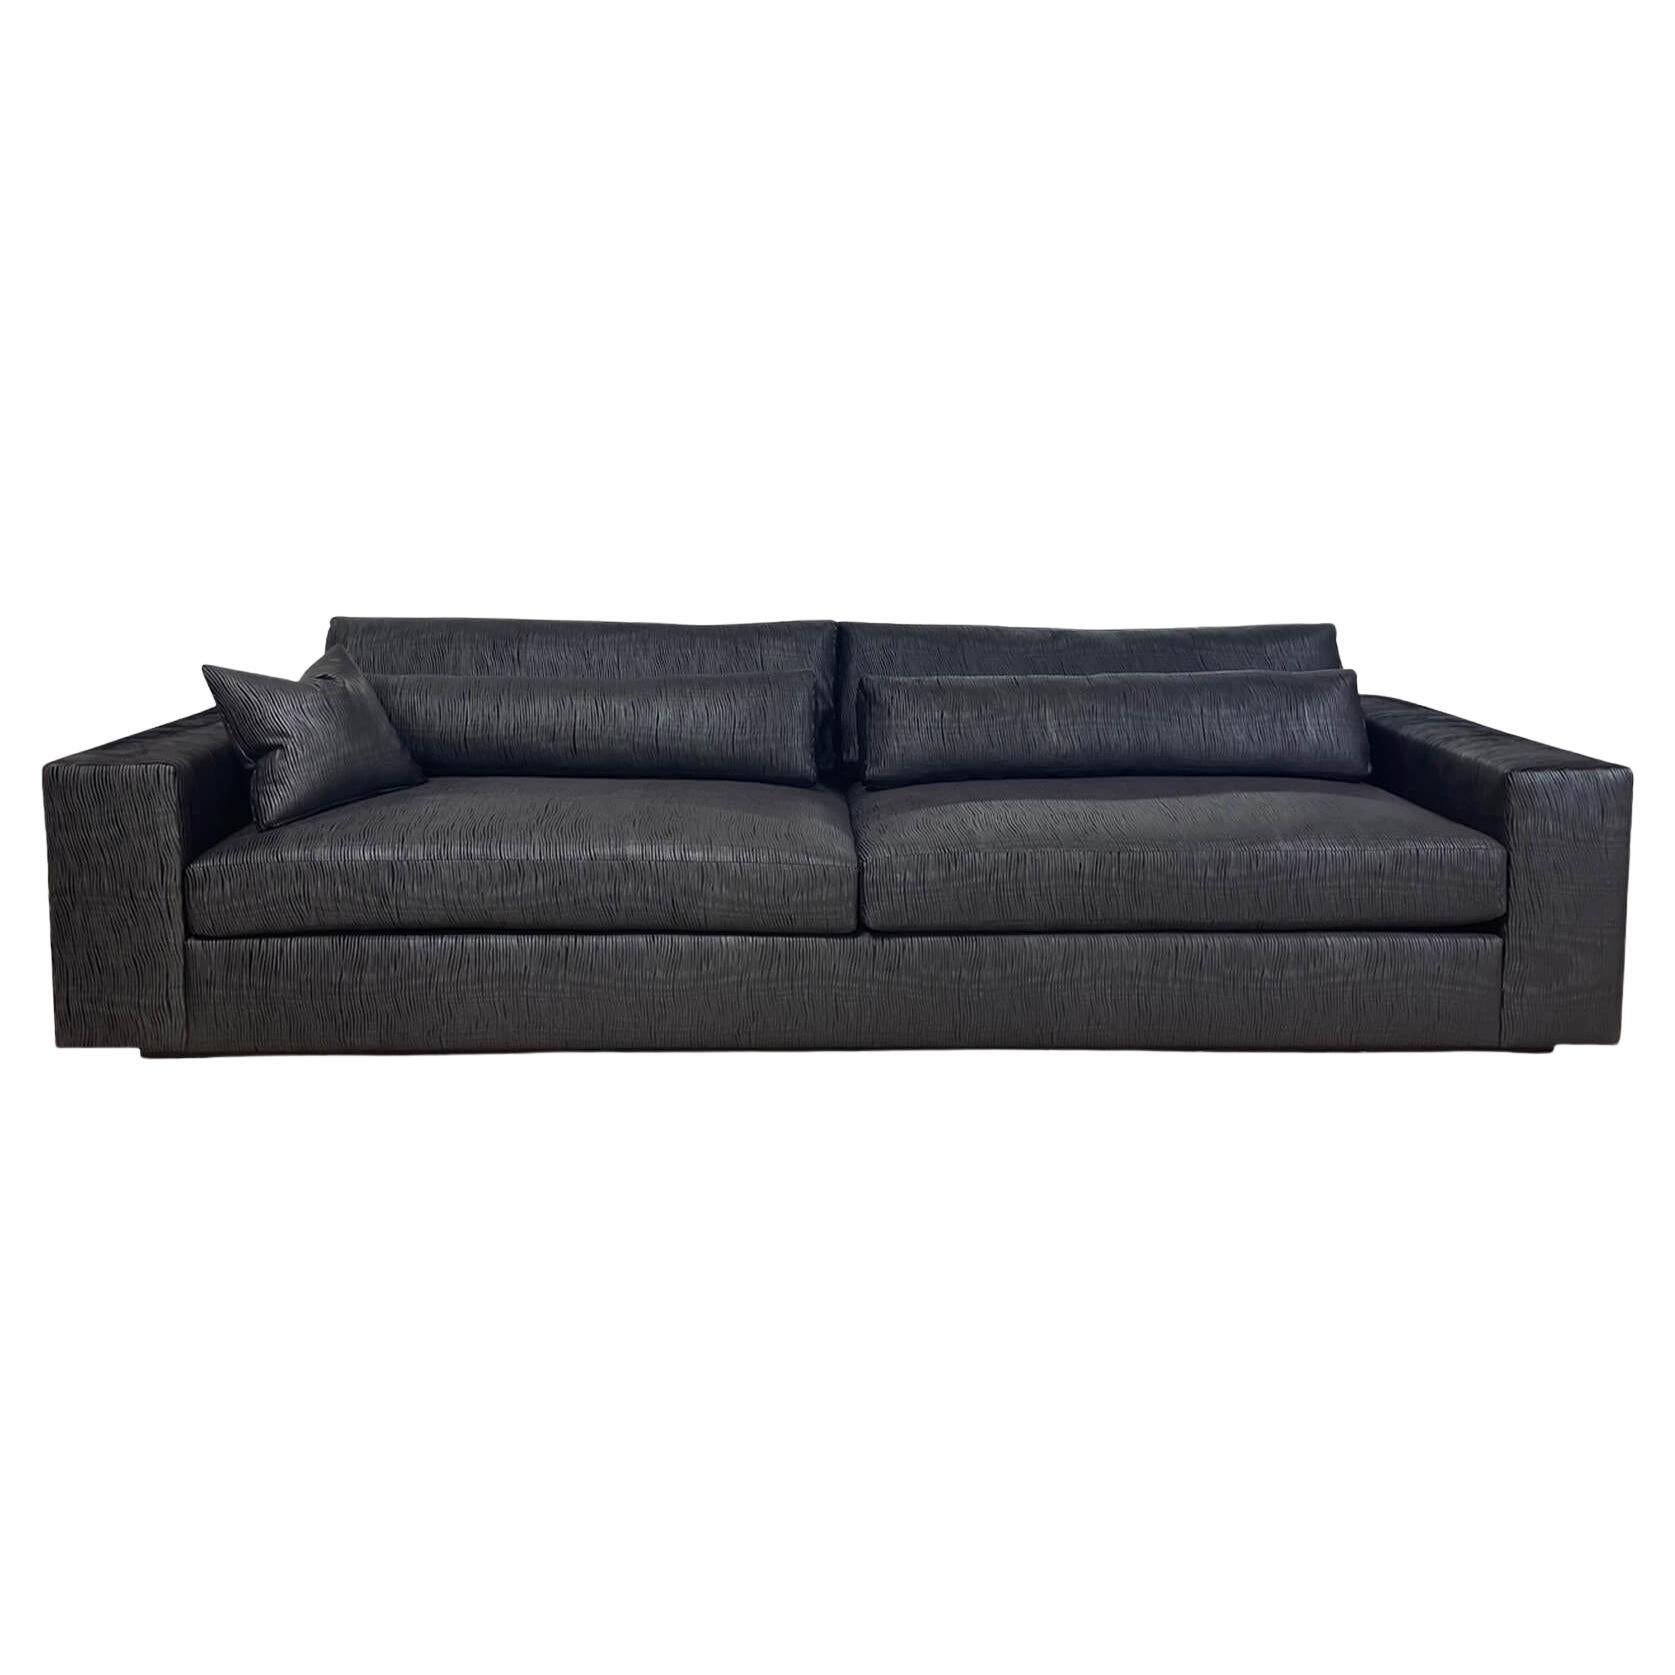 Model One Sofa For Sale